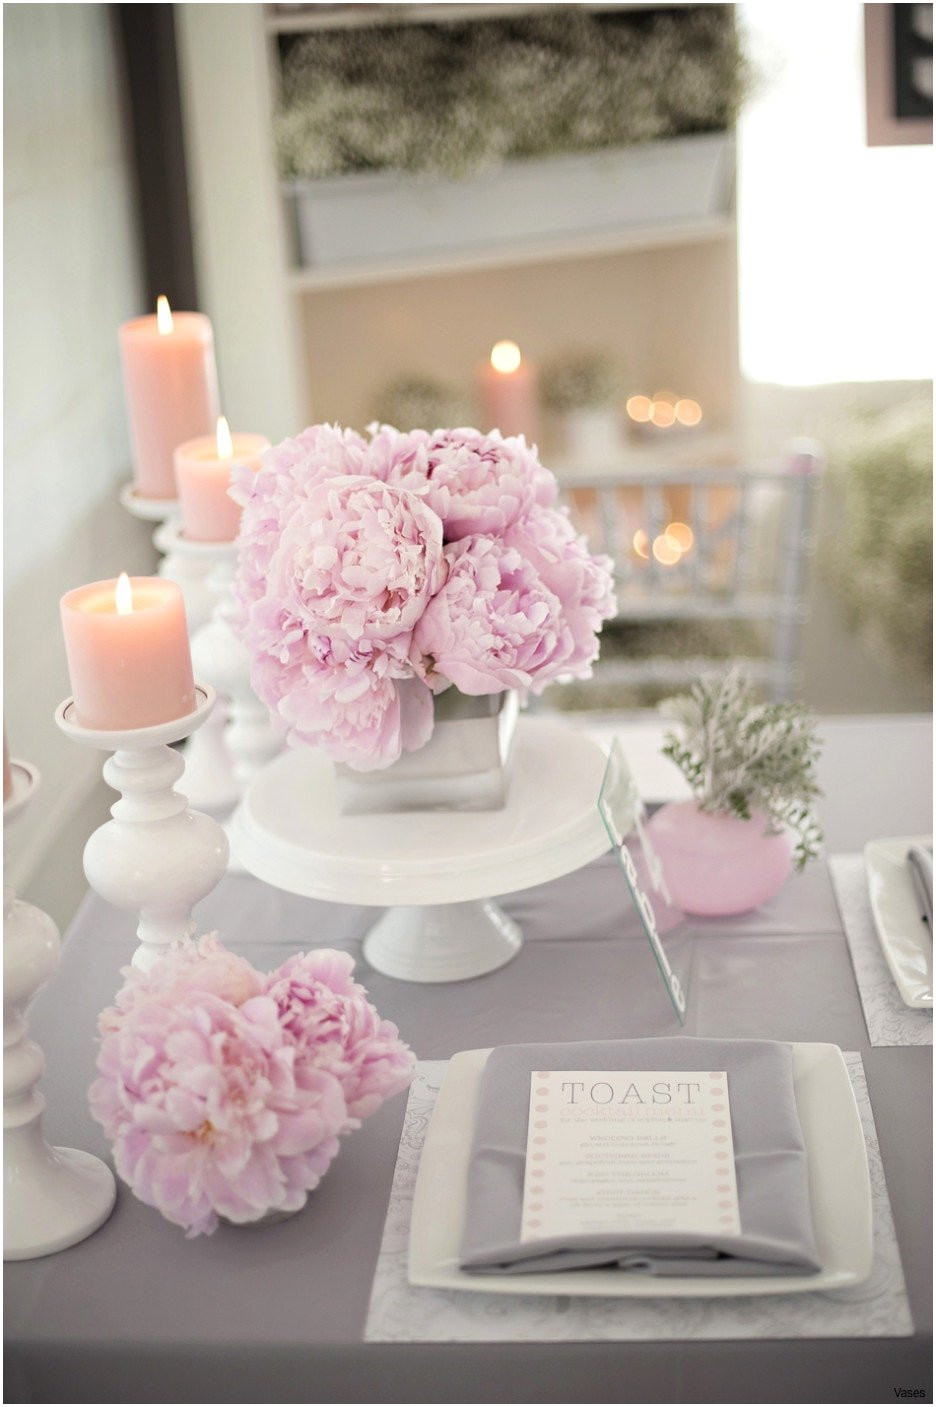 28 Fabulous Vase Of Peonies 2024 free download vase of peonies of cheap flowers formidable dsc h vases square centerpiece dsc i 0d for cheap flowers formidable dsc h vases square centerpiece dsc i 0d cheap tall design ideas 936